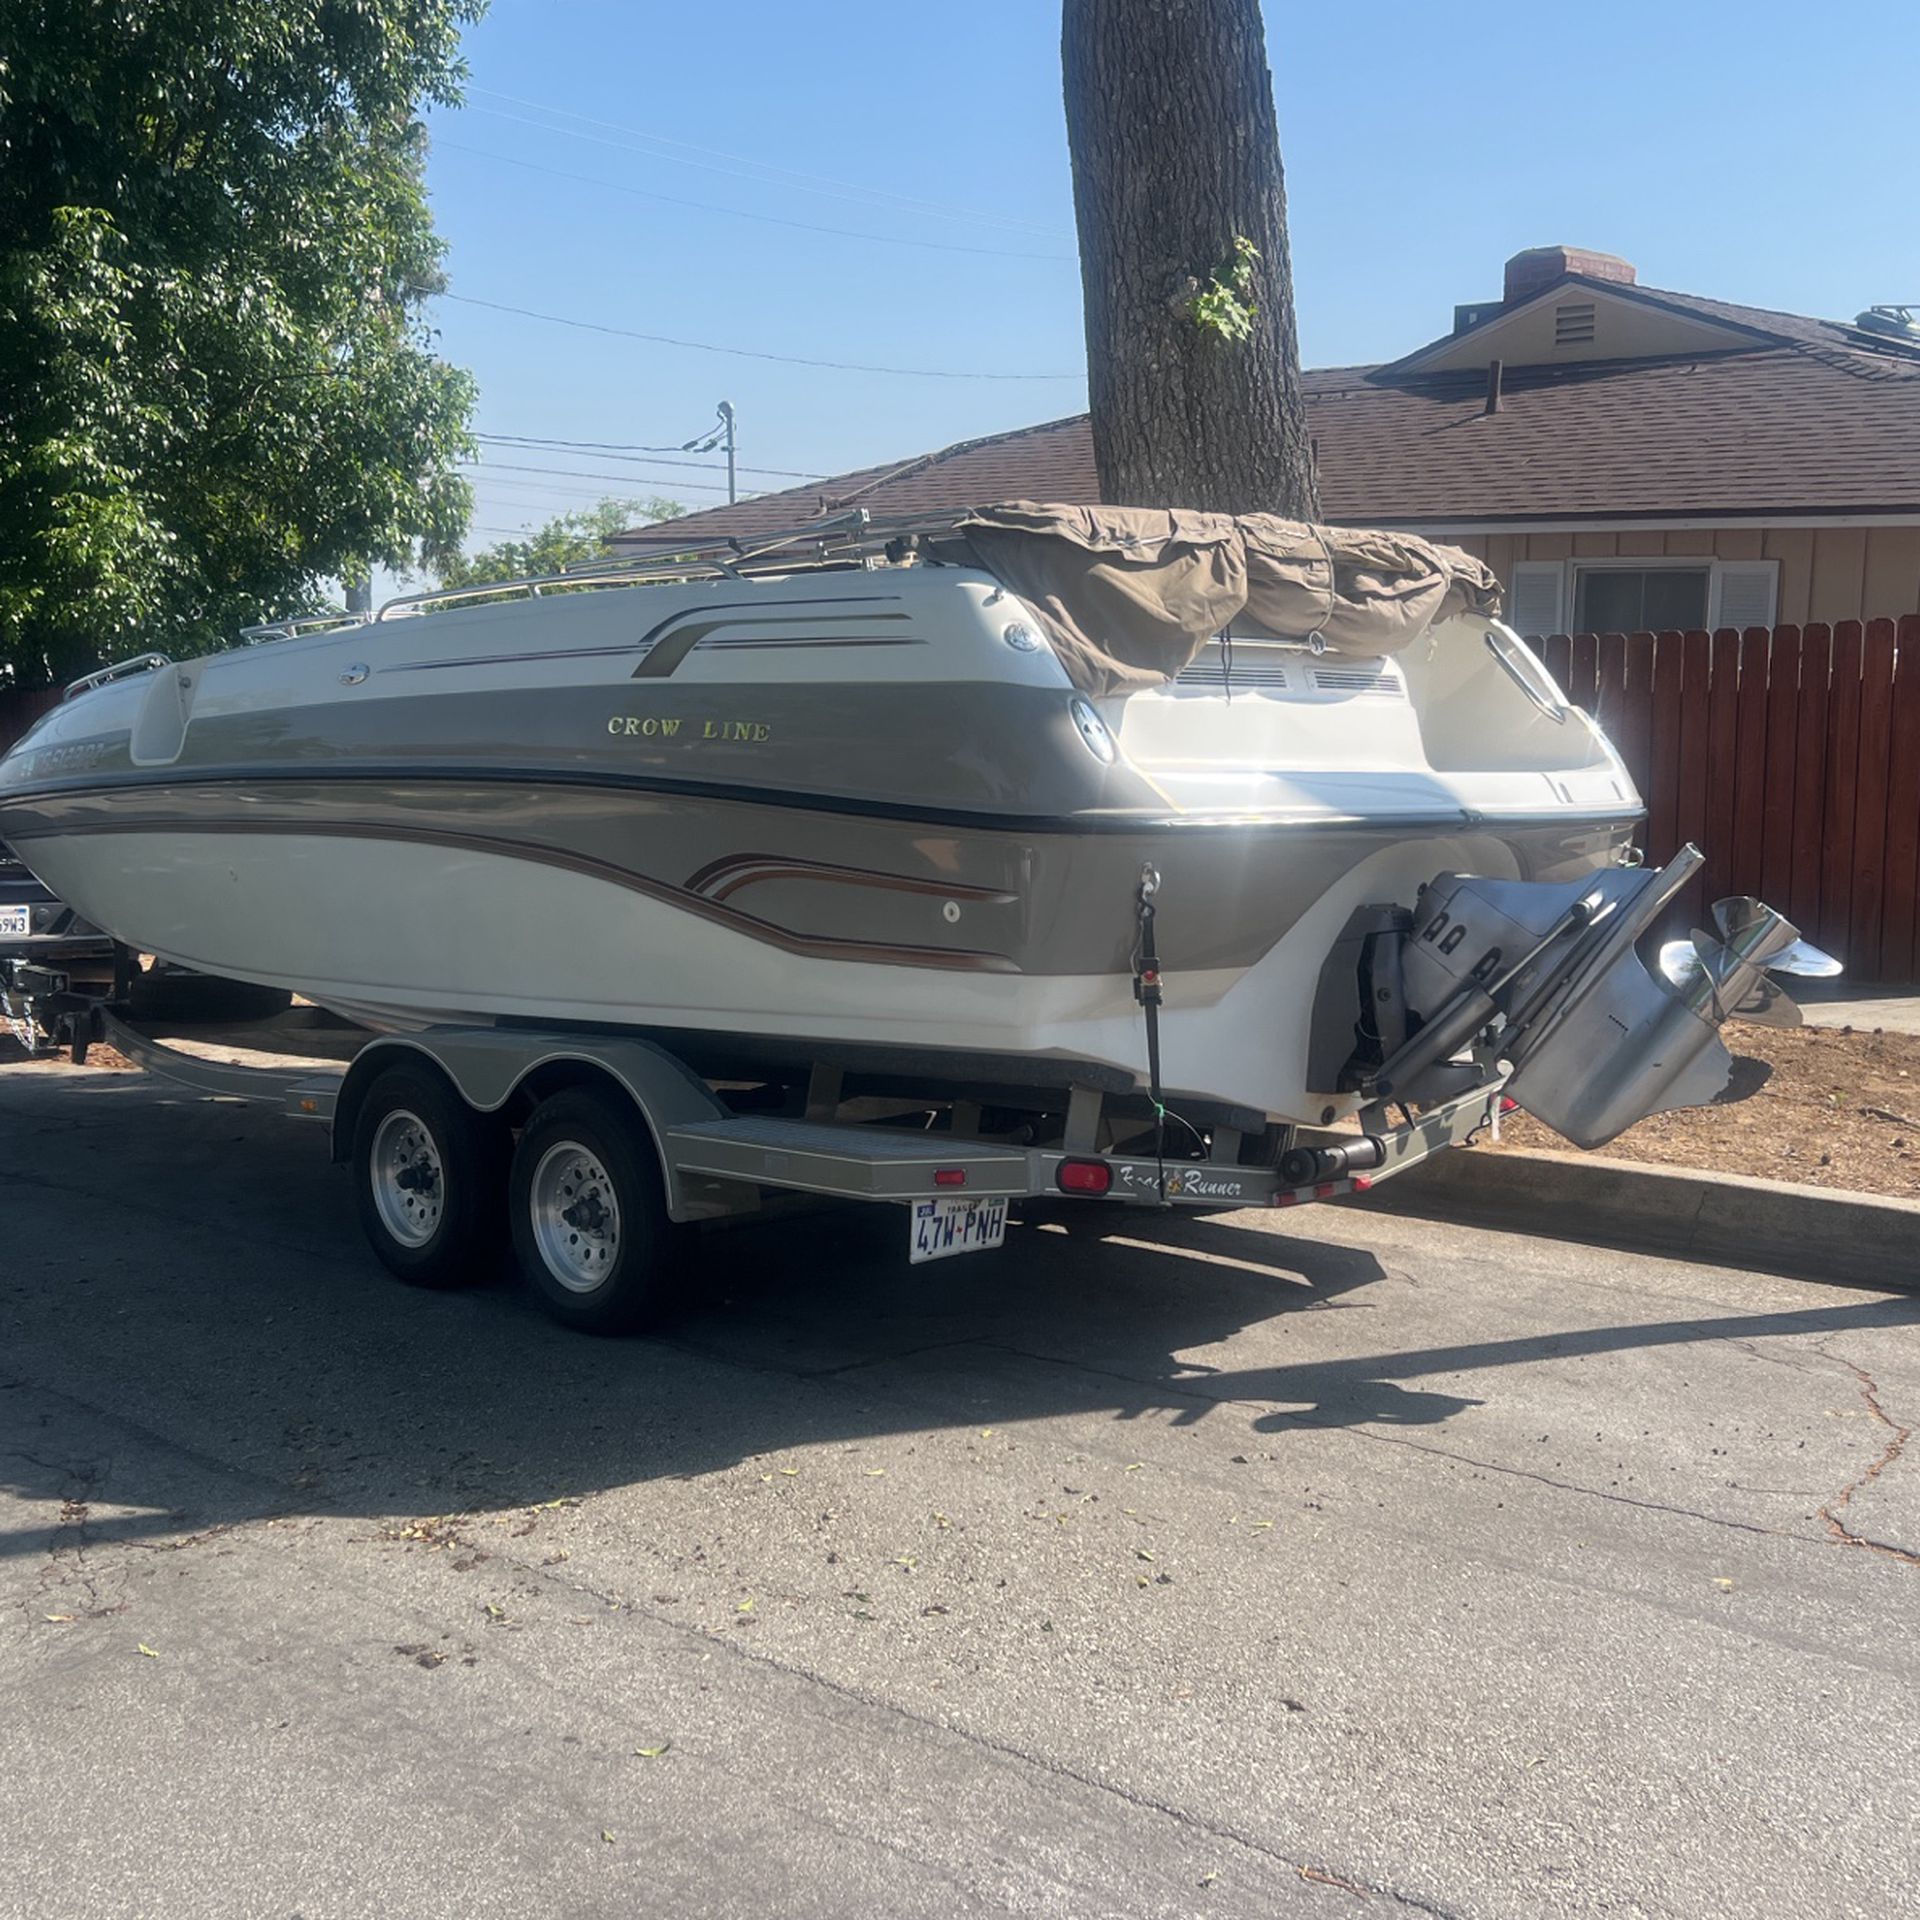 1999 Crownline 238 DB open bow